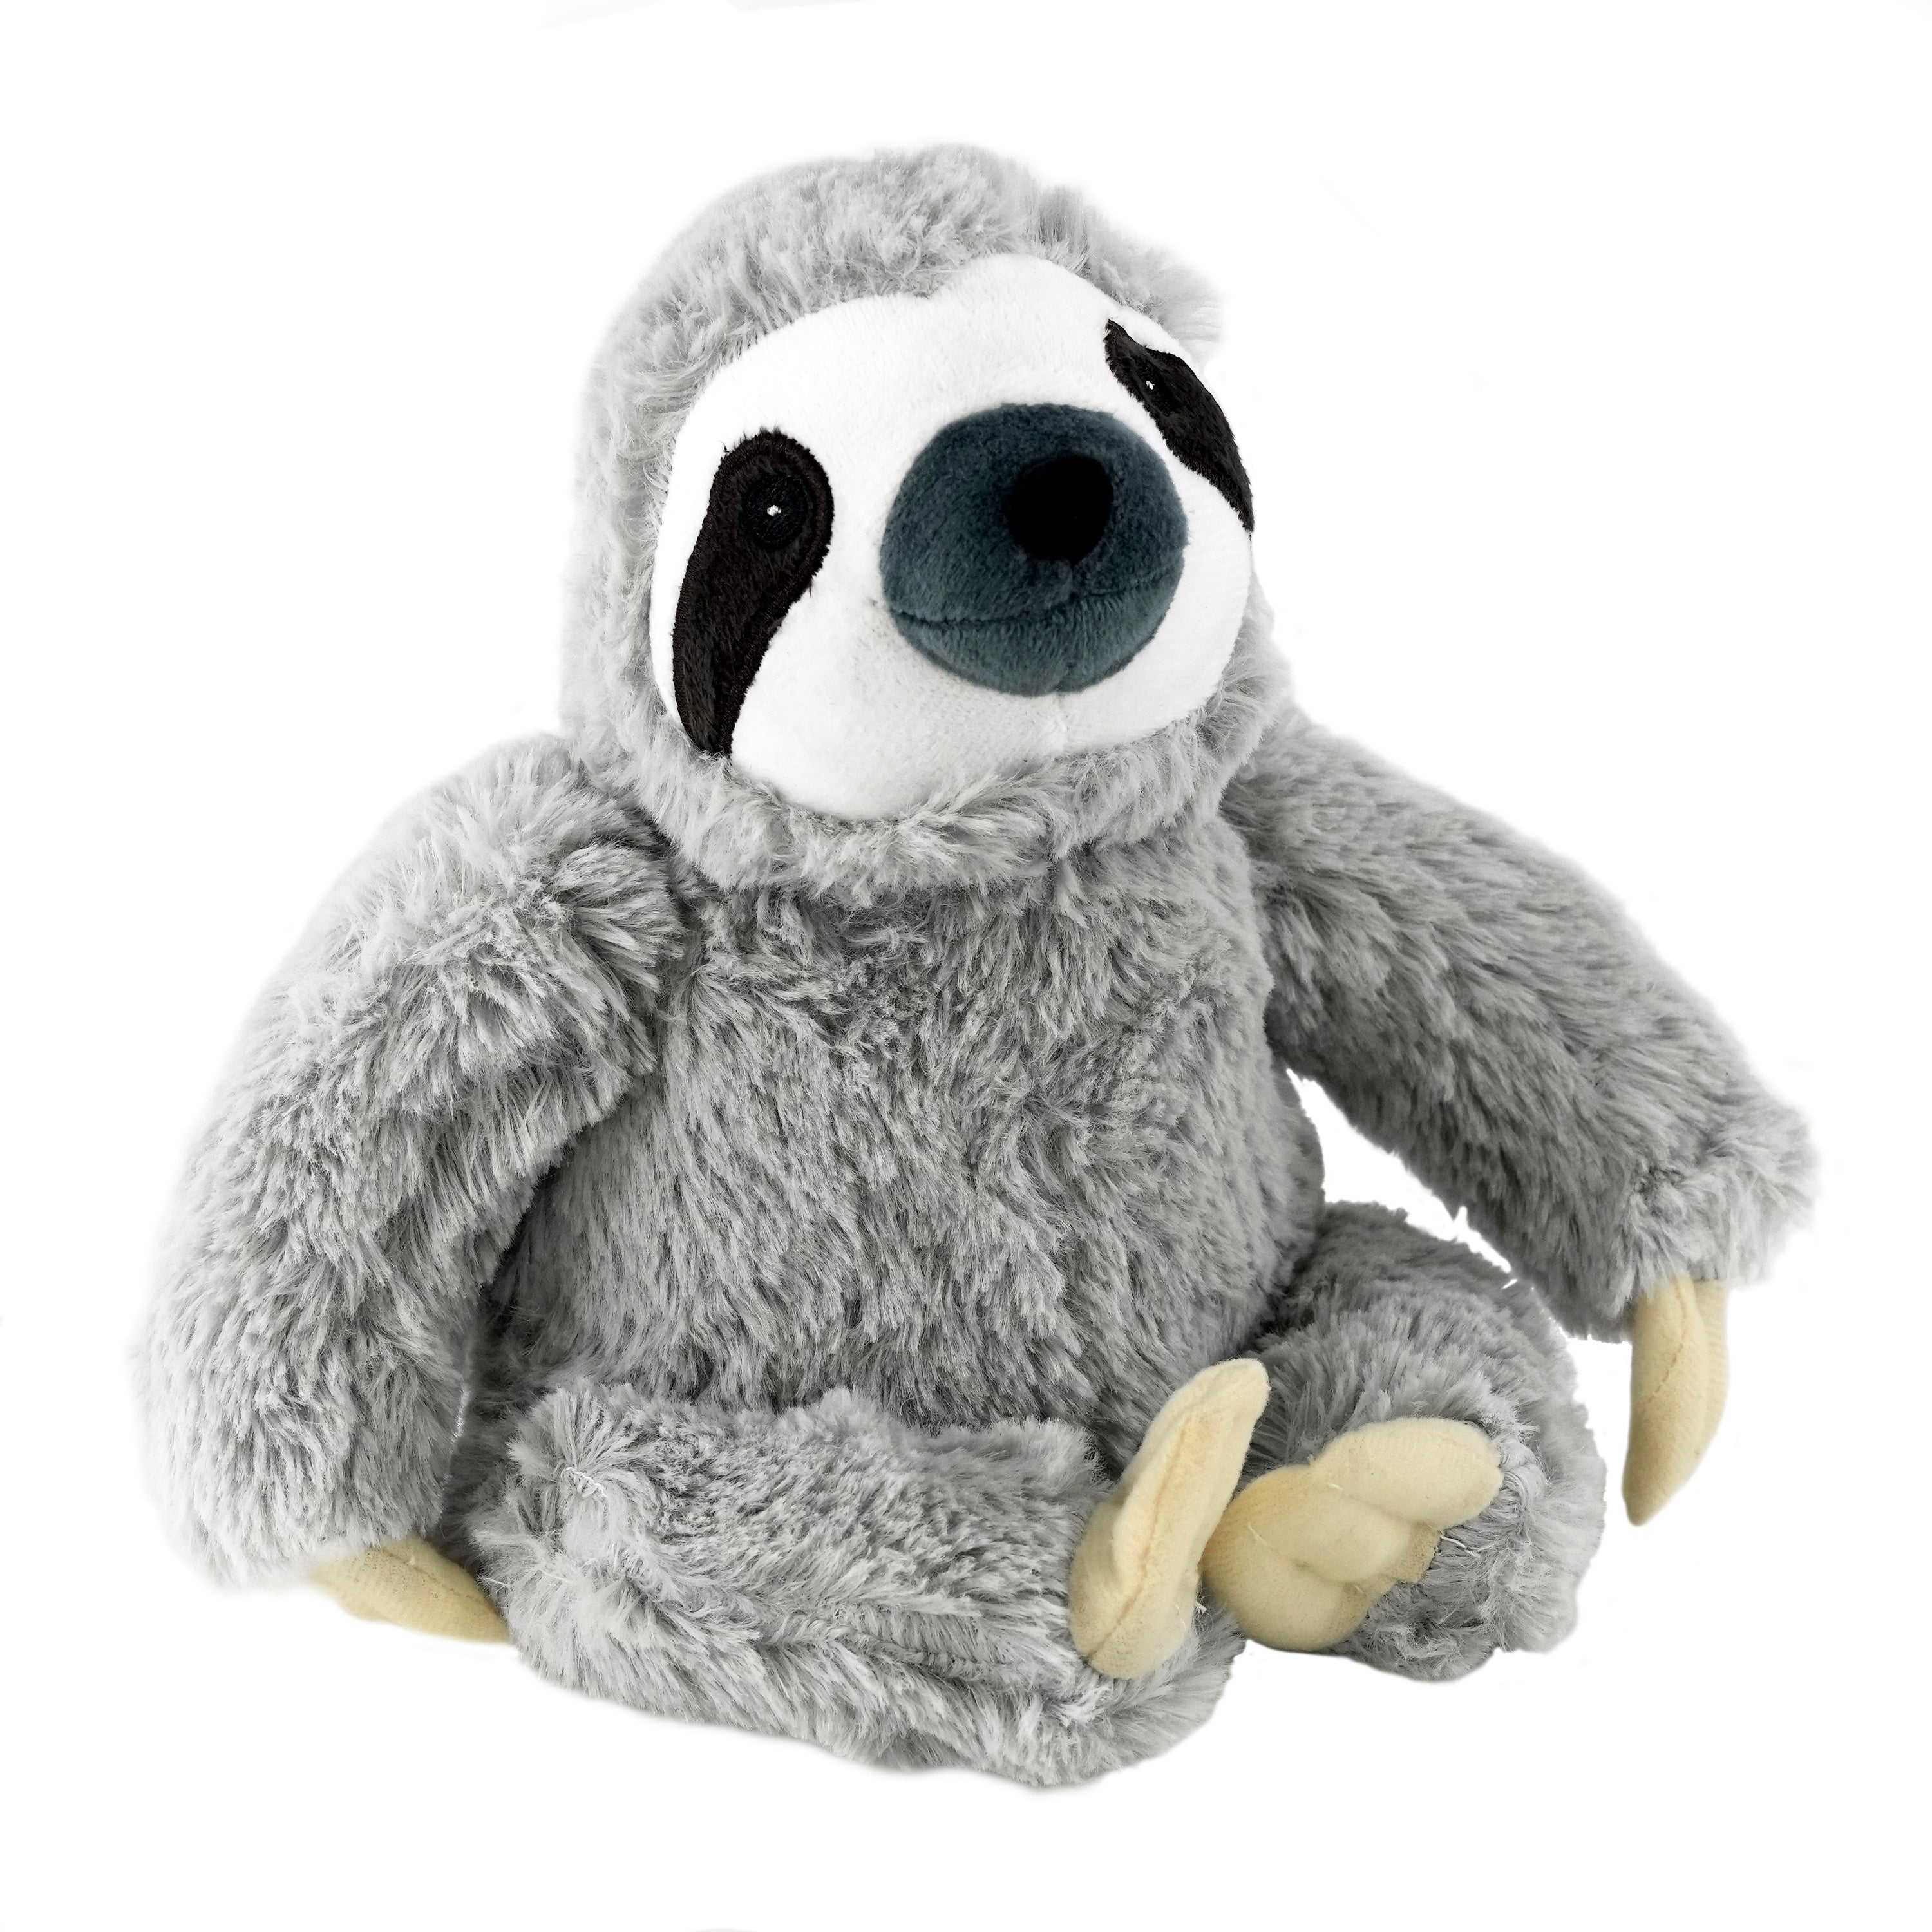 Sloth Door Novelty Stops The Magic Toy Shop - The Magic Toy Shop